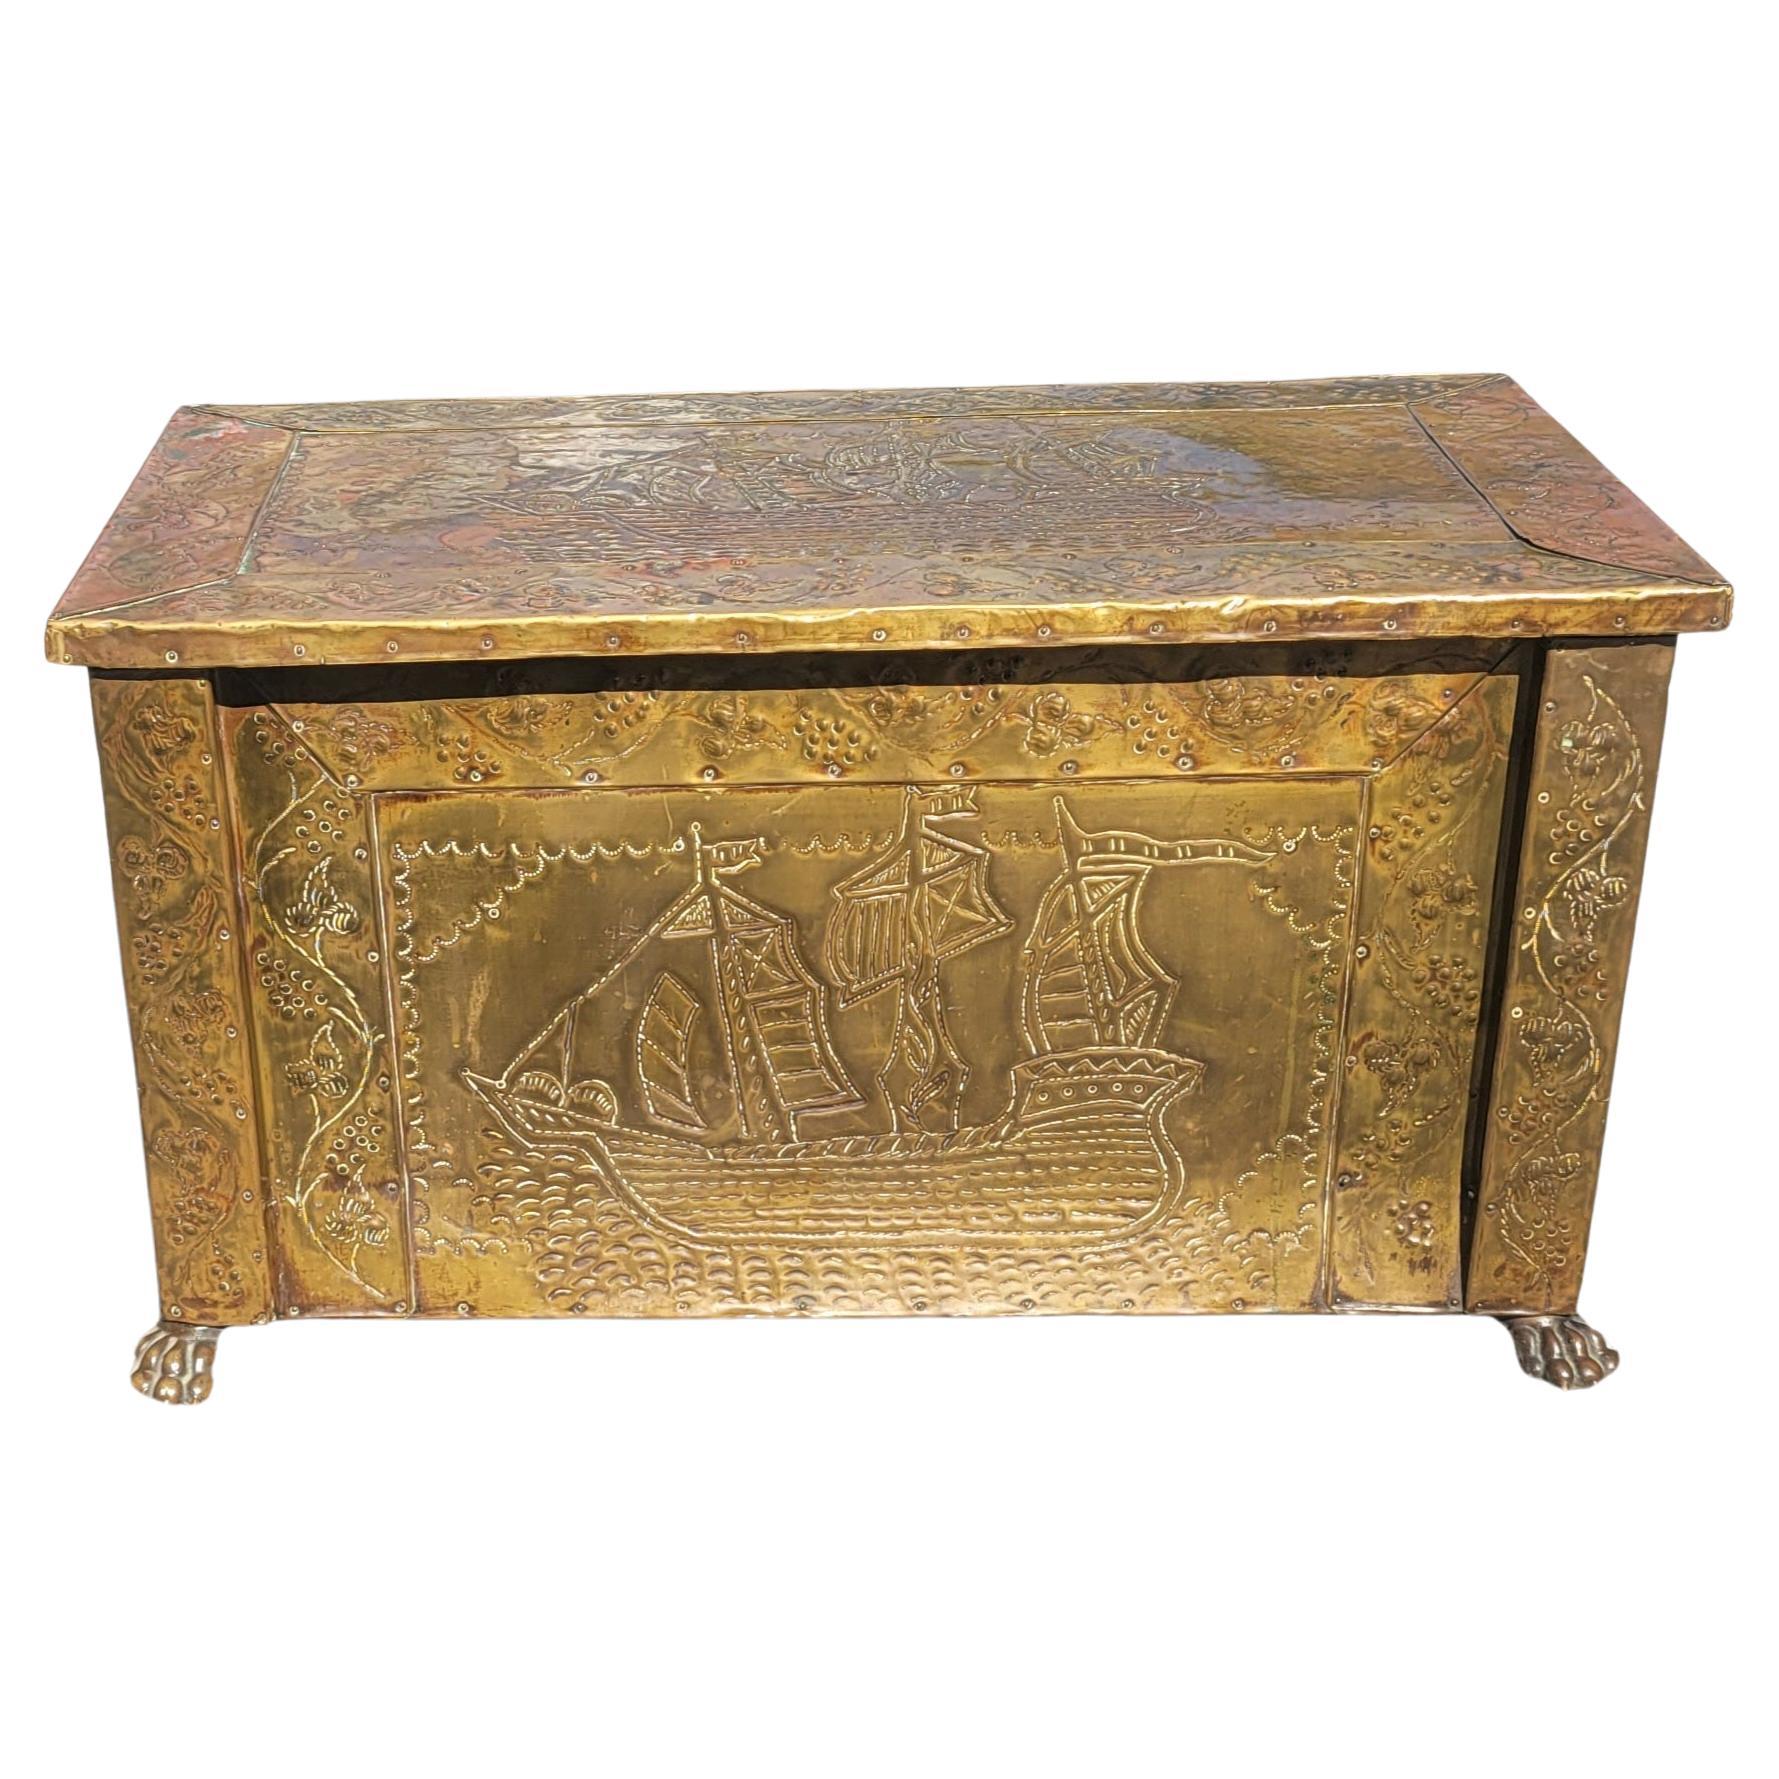 A rare Victorian Brass and copper 
 repousse designs over wood coal or fireplace Logs Chest with lion paw feet. Repousse brass ornate with ships design on front and top. 
Measures 31